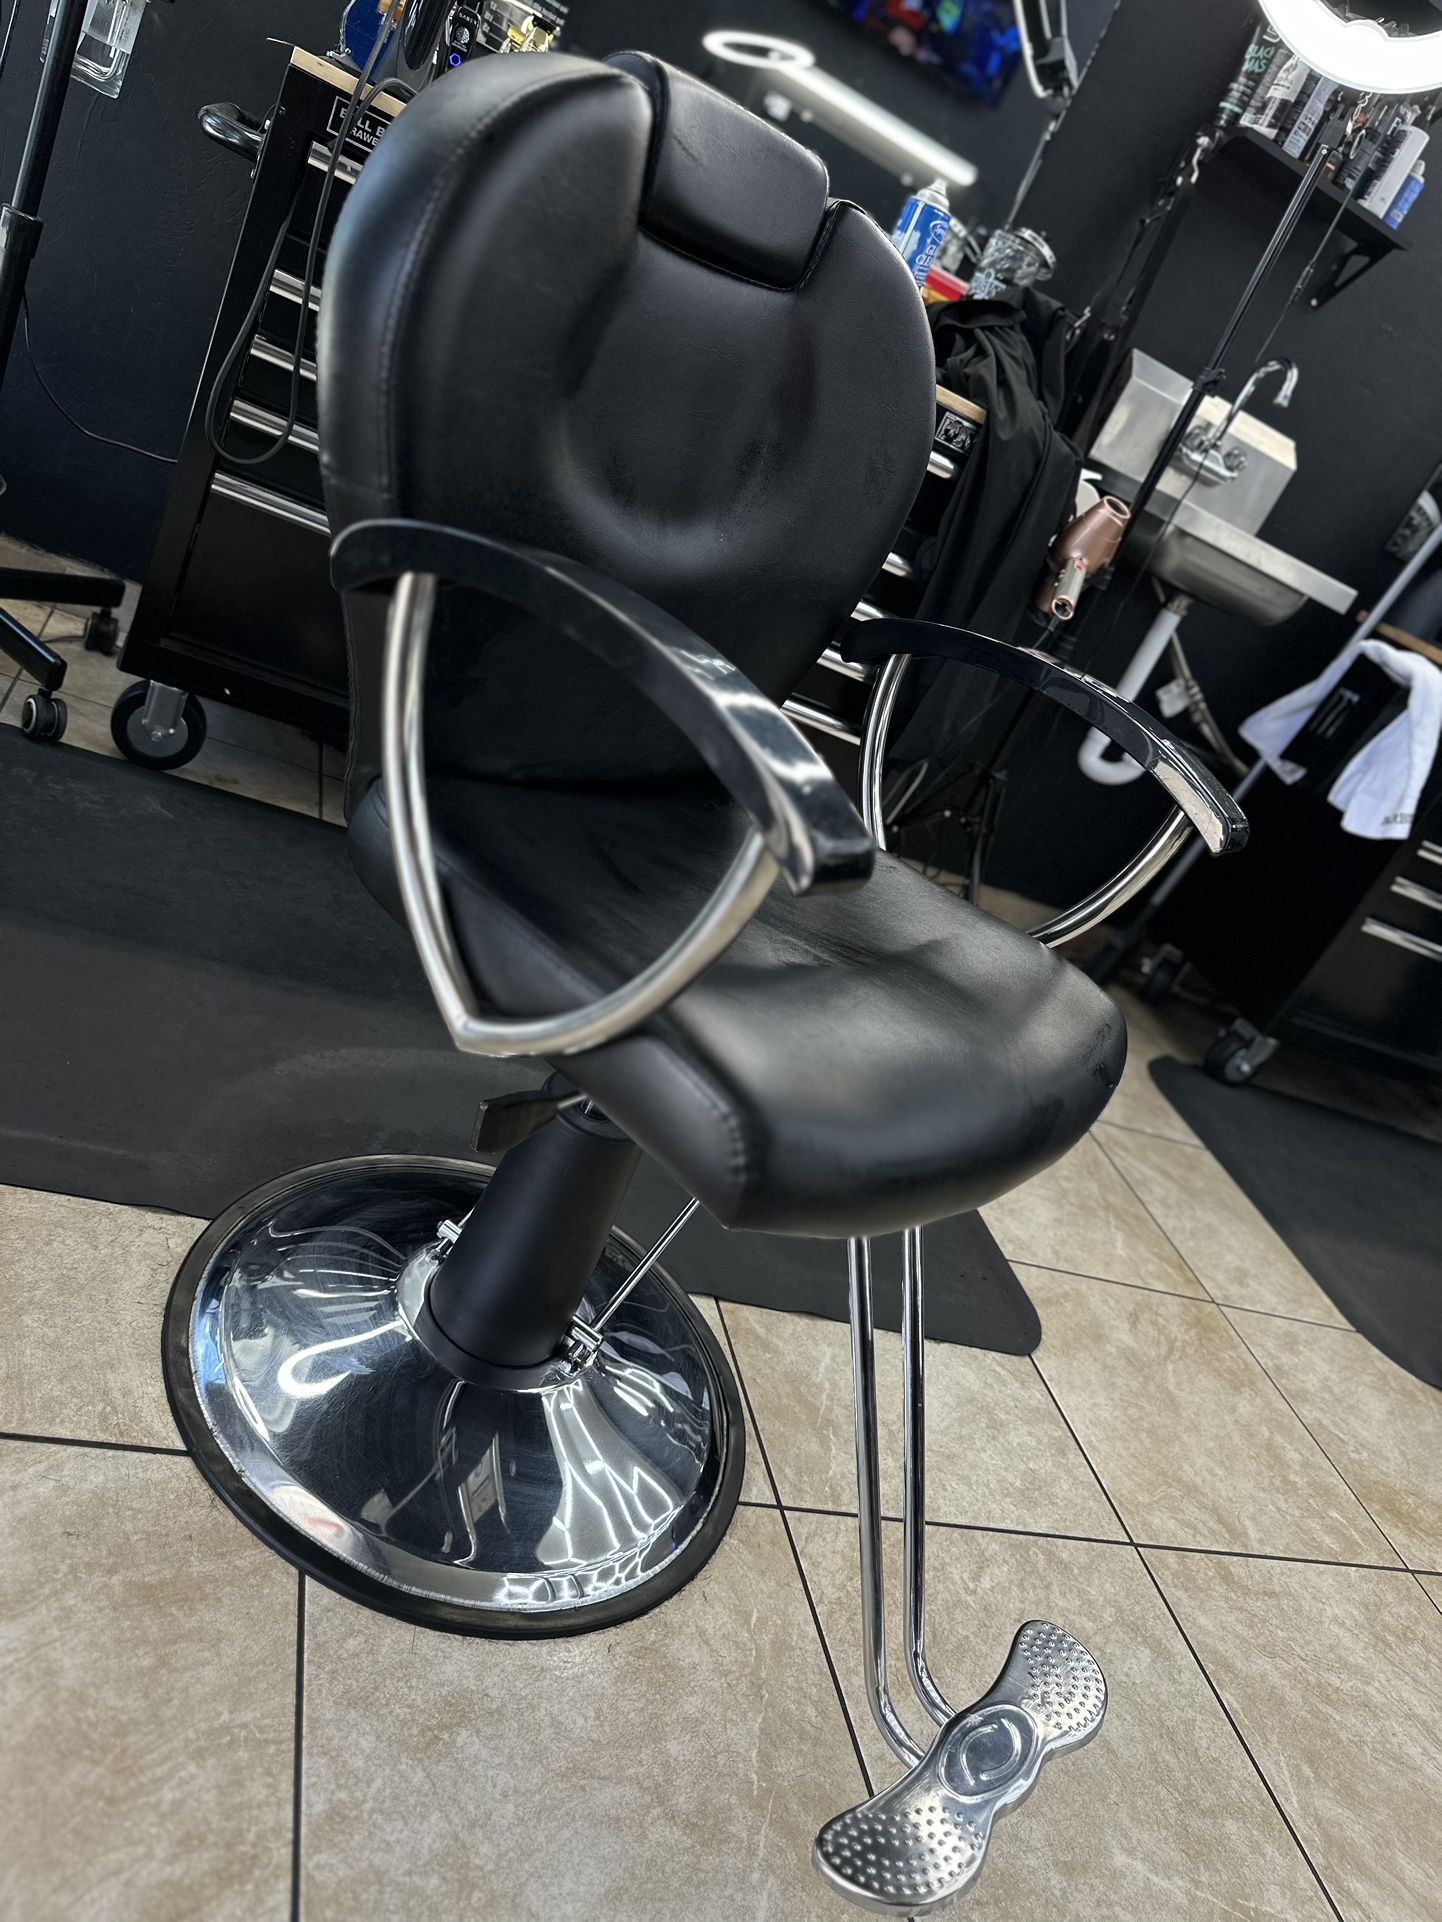 A Bundle Of  8 Barber chairs 